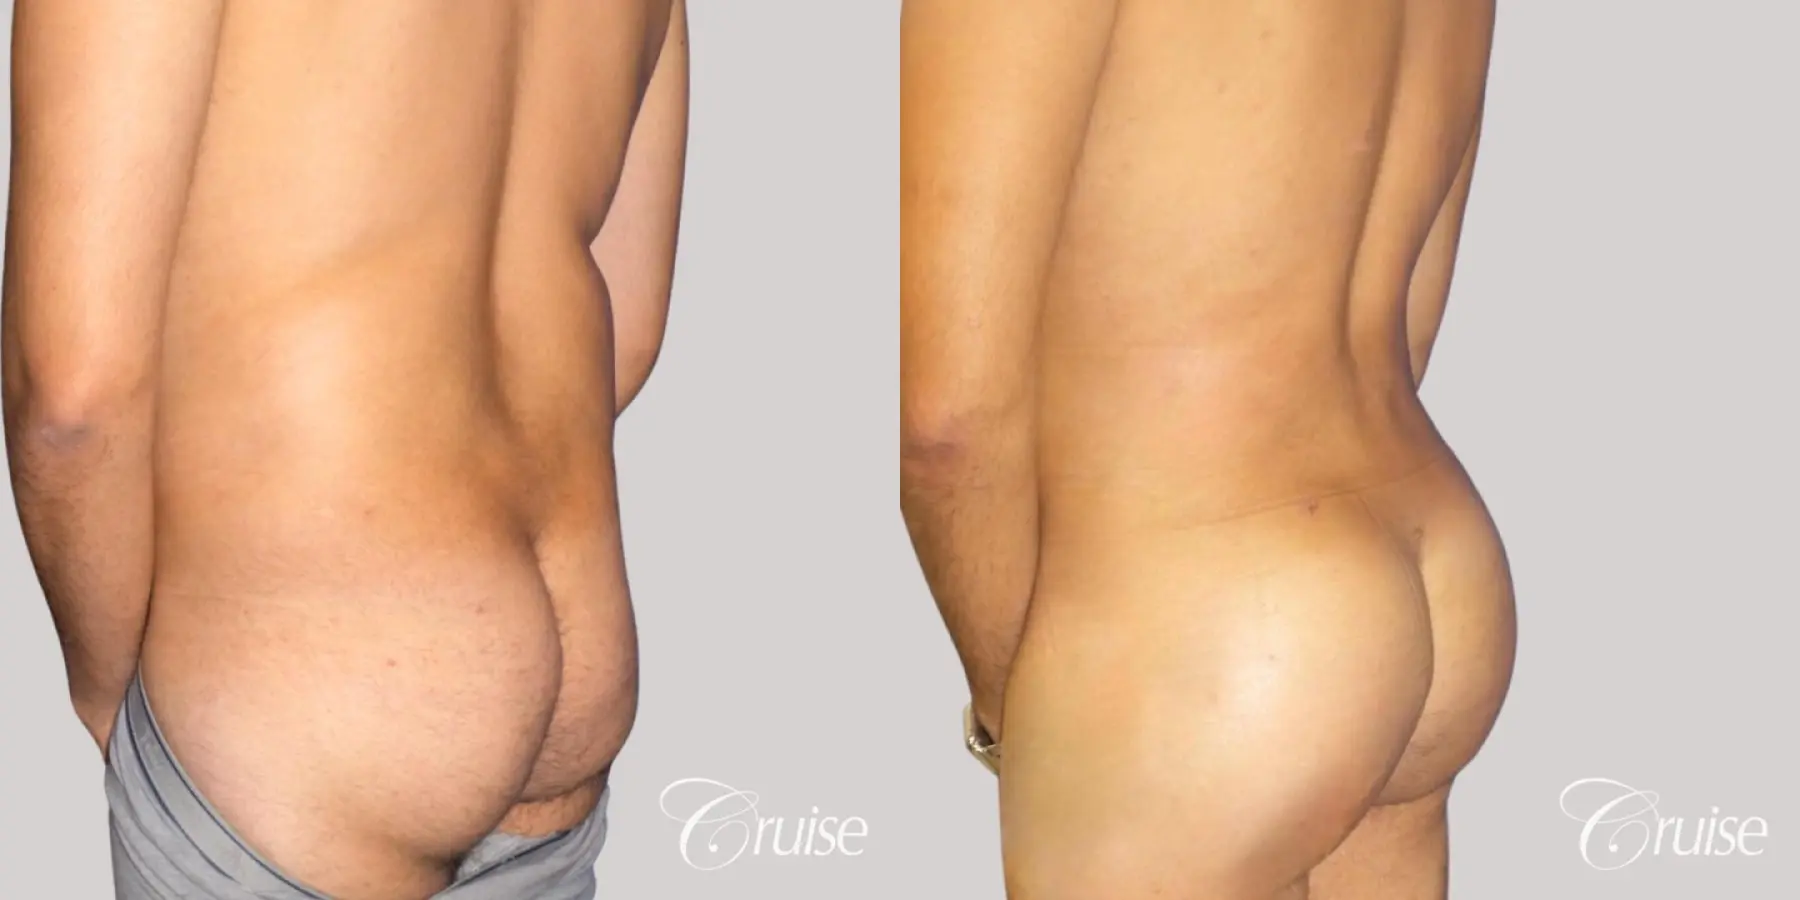 Butt Augmentation: Patient 1 - Before and After 2